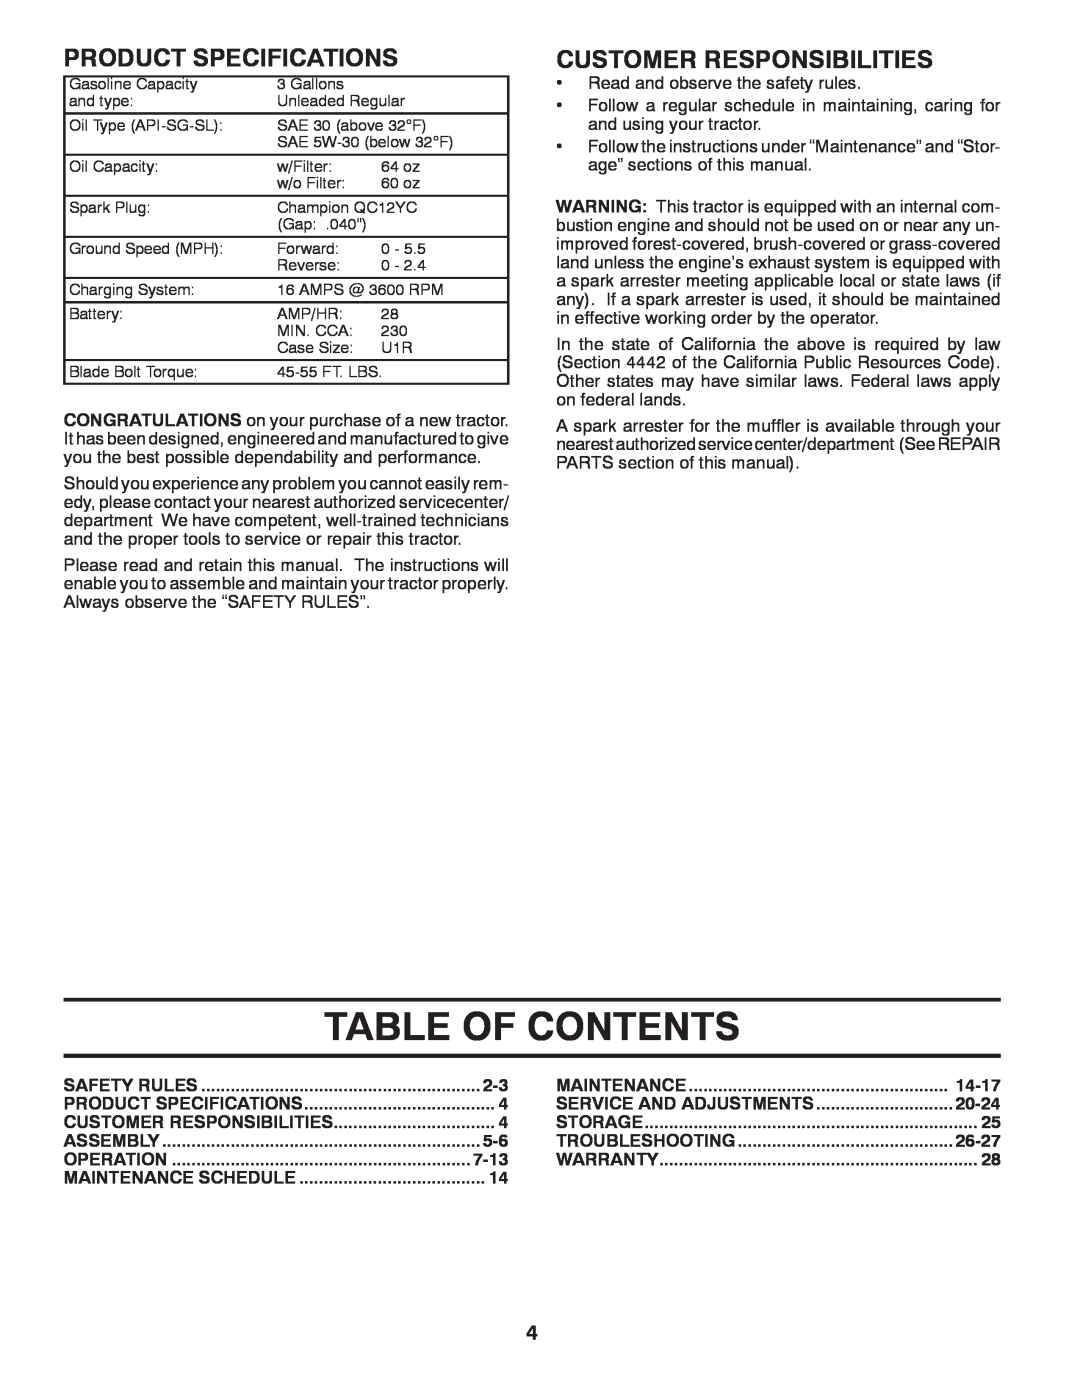 Poulan 85-50, 96042012600 Table Of Contents, Product Specifications, Customer Responsibilities, 7-13, 14-17, 20-24, 26-27 